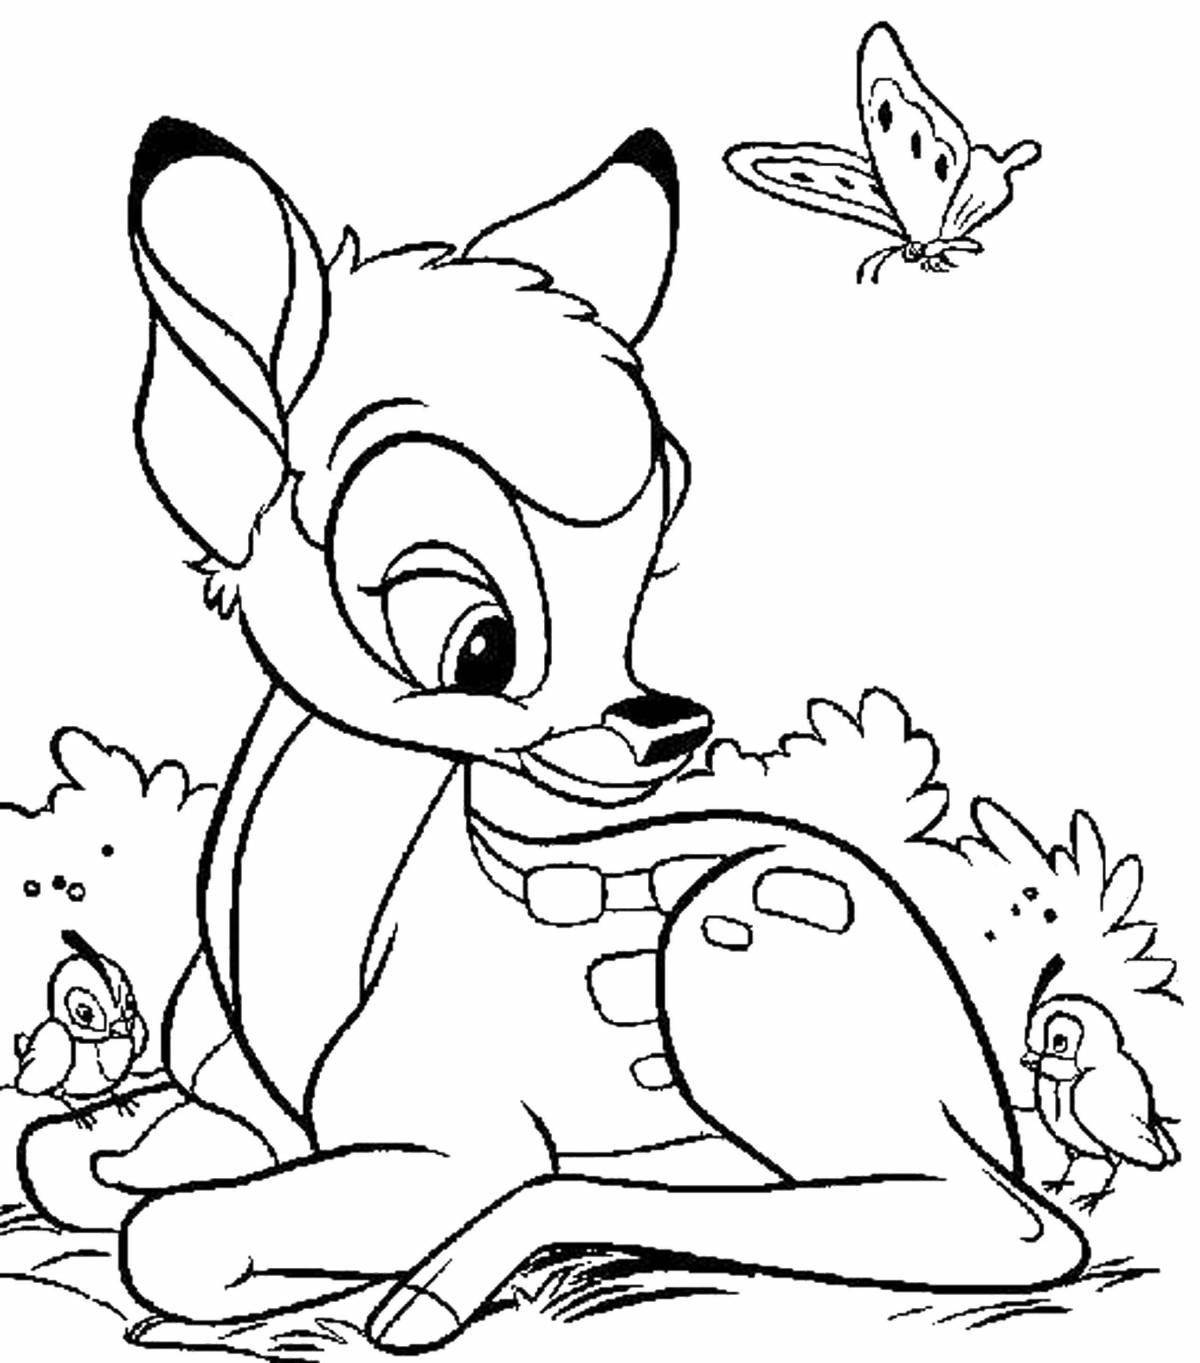 Coloring book with adorable cartoon characters for 4-5 year olds